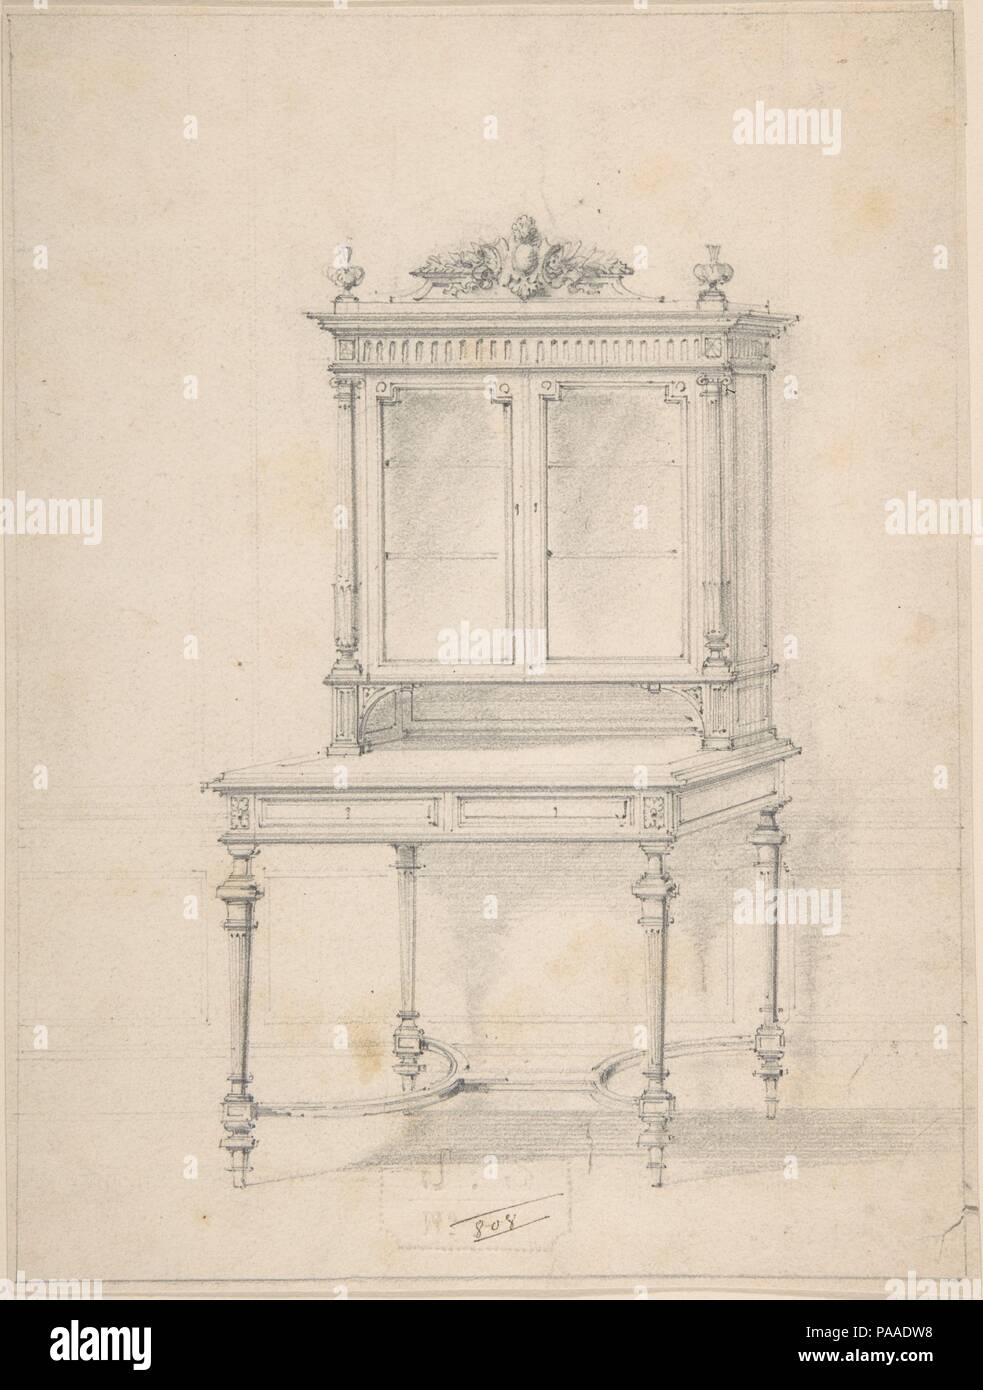 Design for a Desk with Cabinet. Artist: Anonymous, French, 19th century. Dimensions: 9 3/16 x 6 15/16 in. (23.4 x 17.7 cm). Date: 19th century. Museum: Metropolitan Museum of Art, New York, USA. Stock Photo